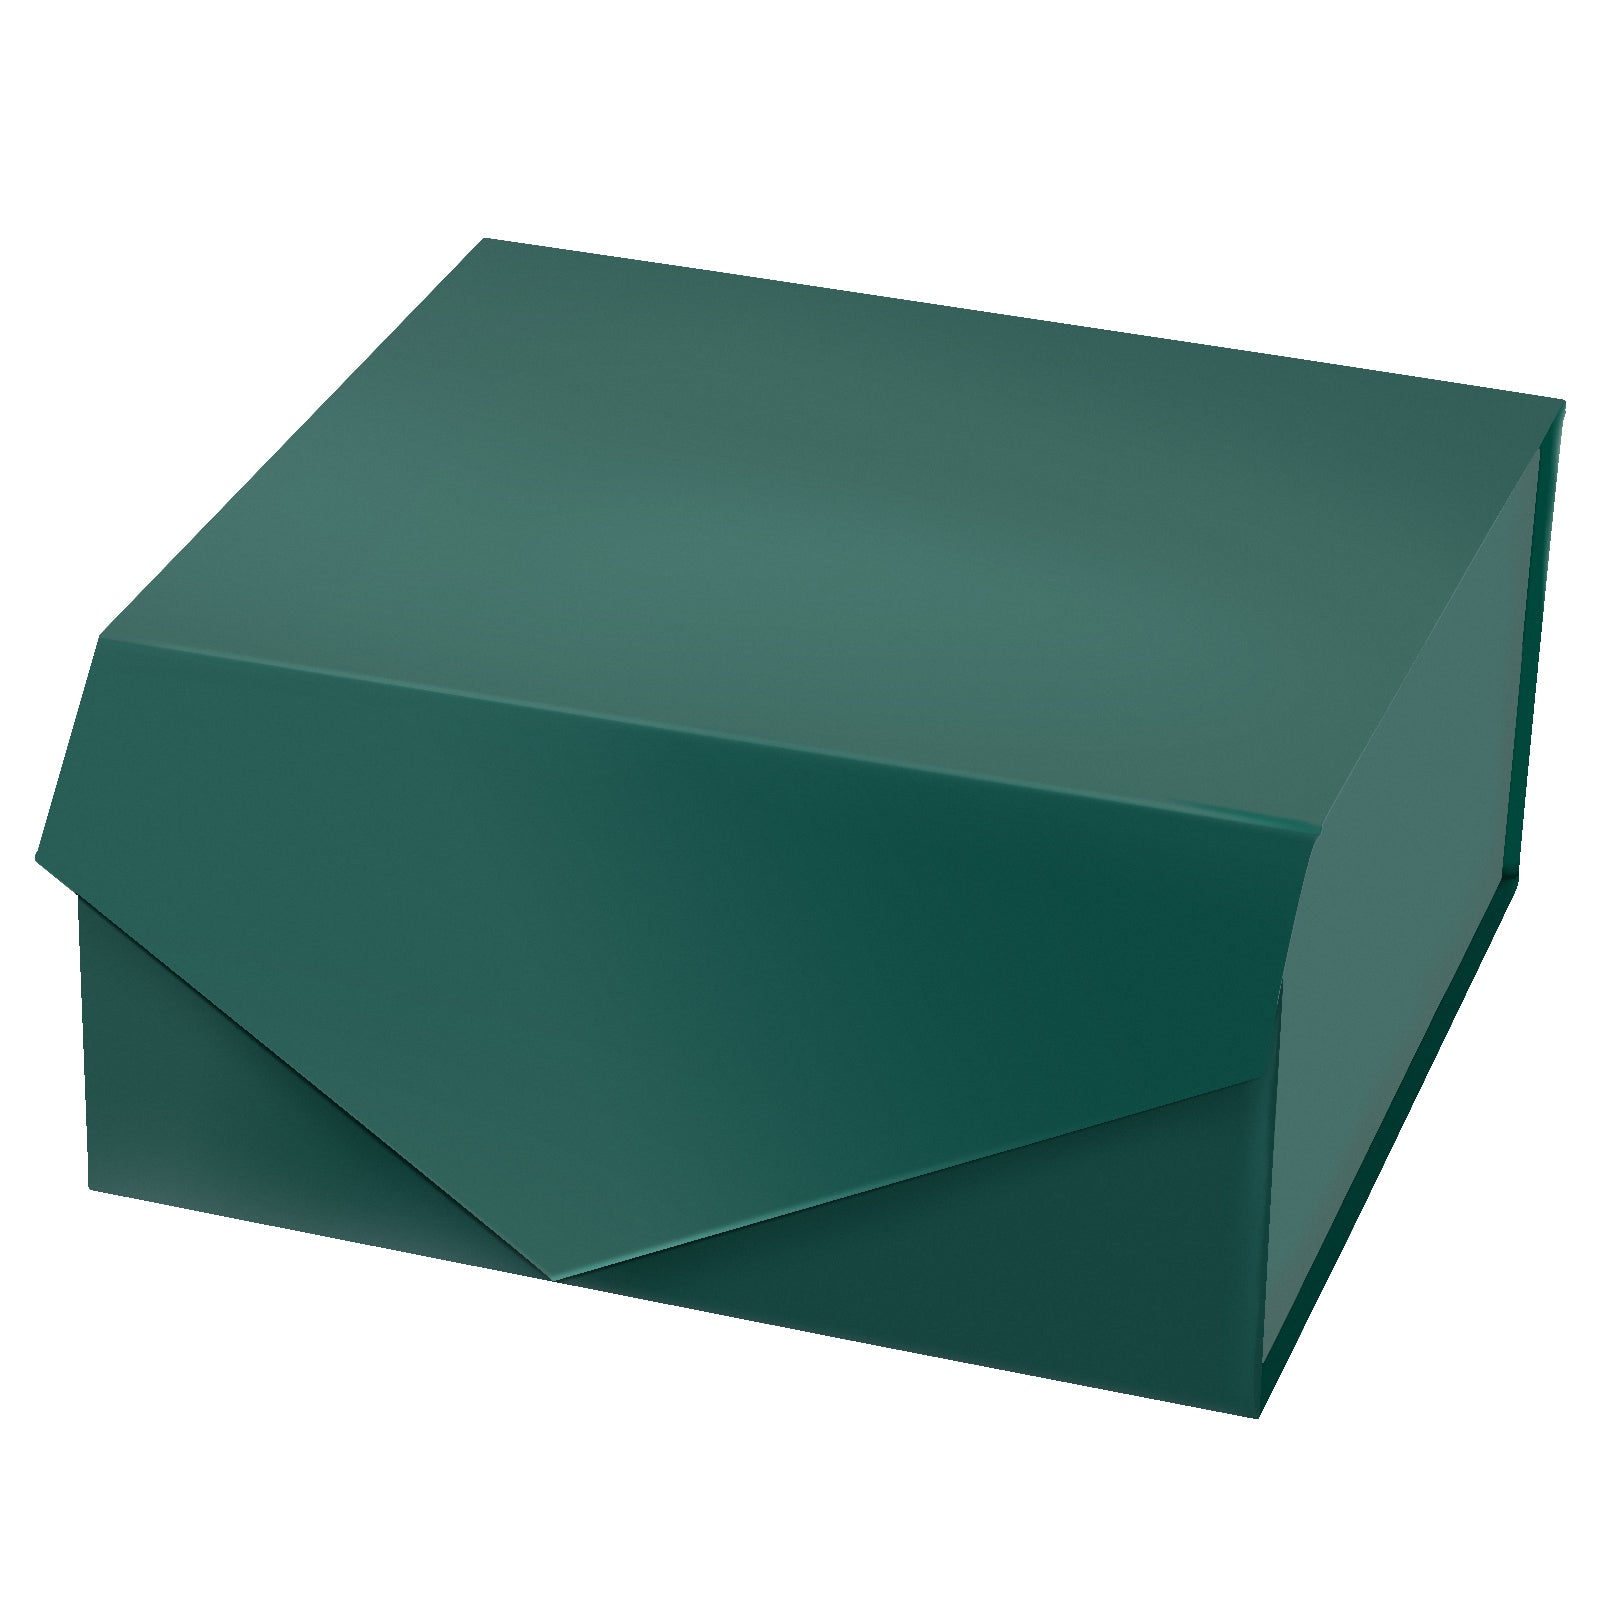 8x8x4 inch Collapsible Gift Box with Magnetic Closure